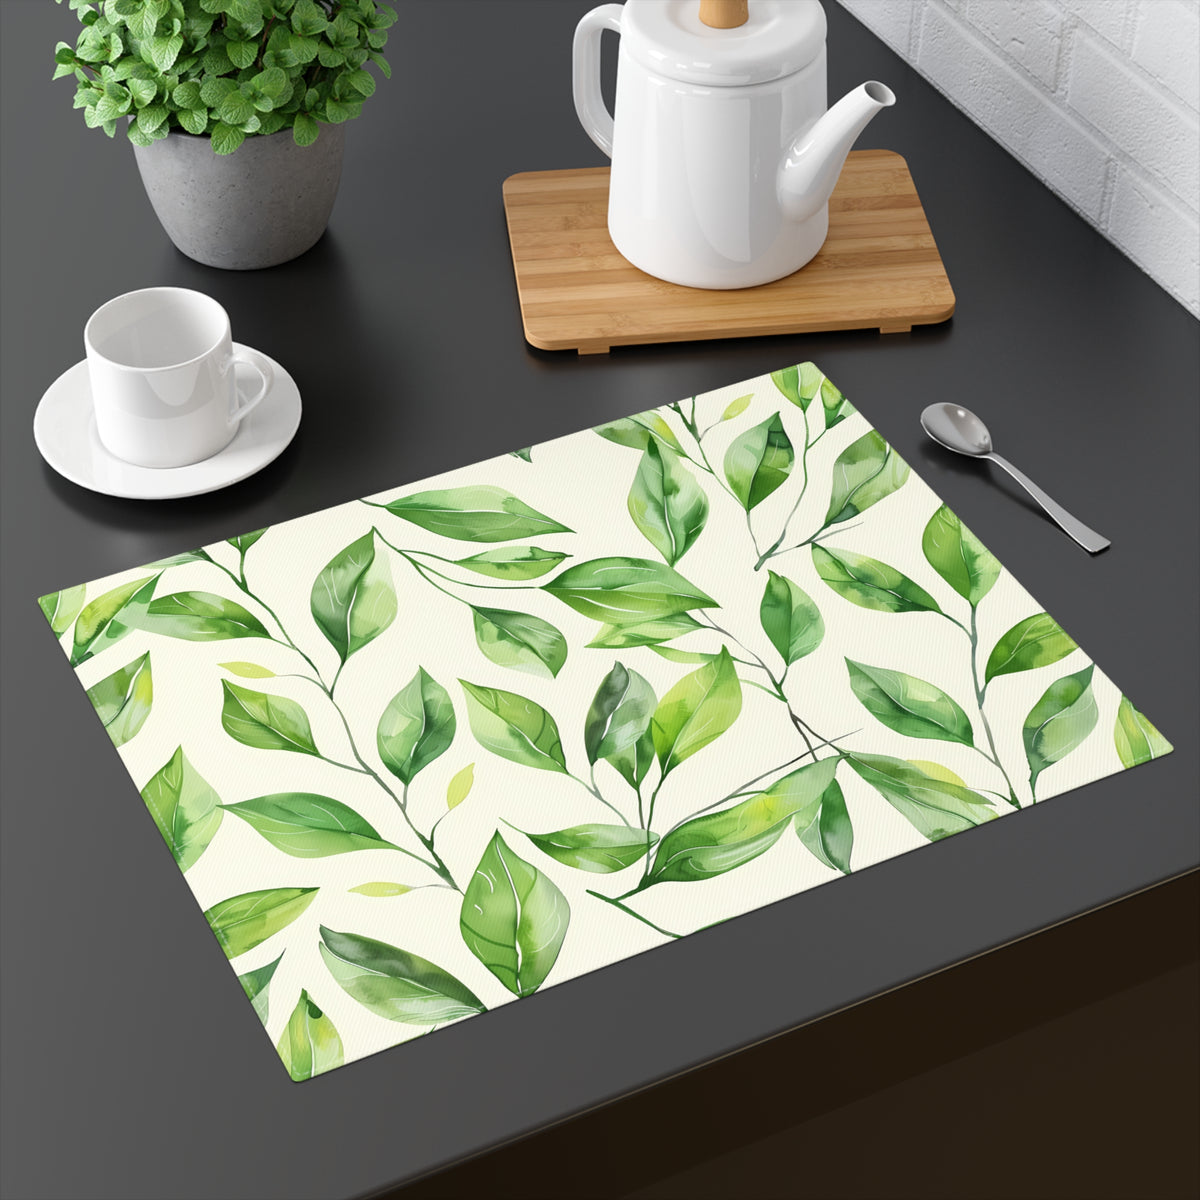 Decorative Cotton Place Mat with Greenery Leaves Design (18&quot; x 14&quot;)